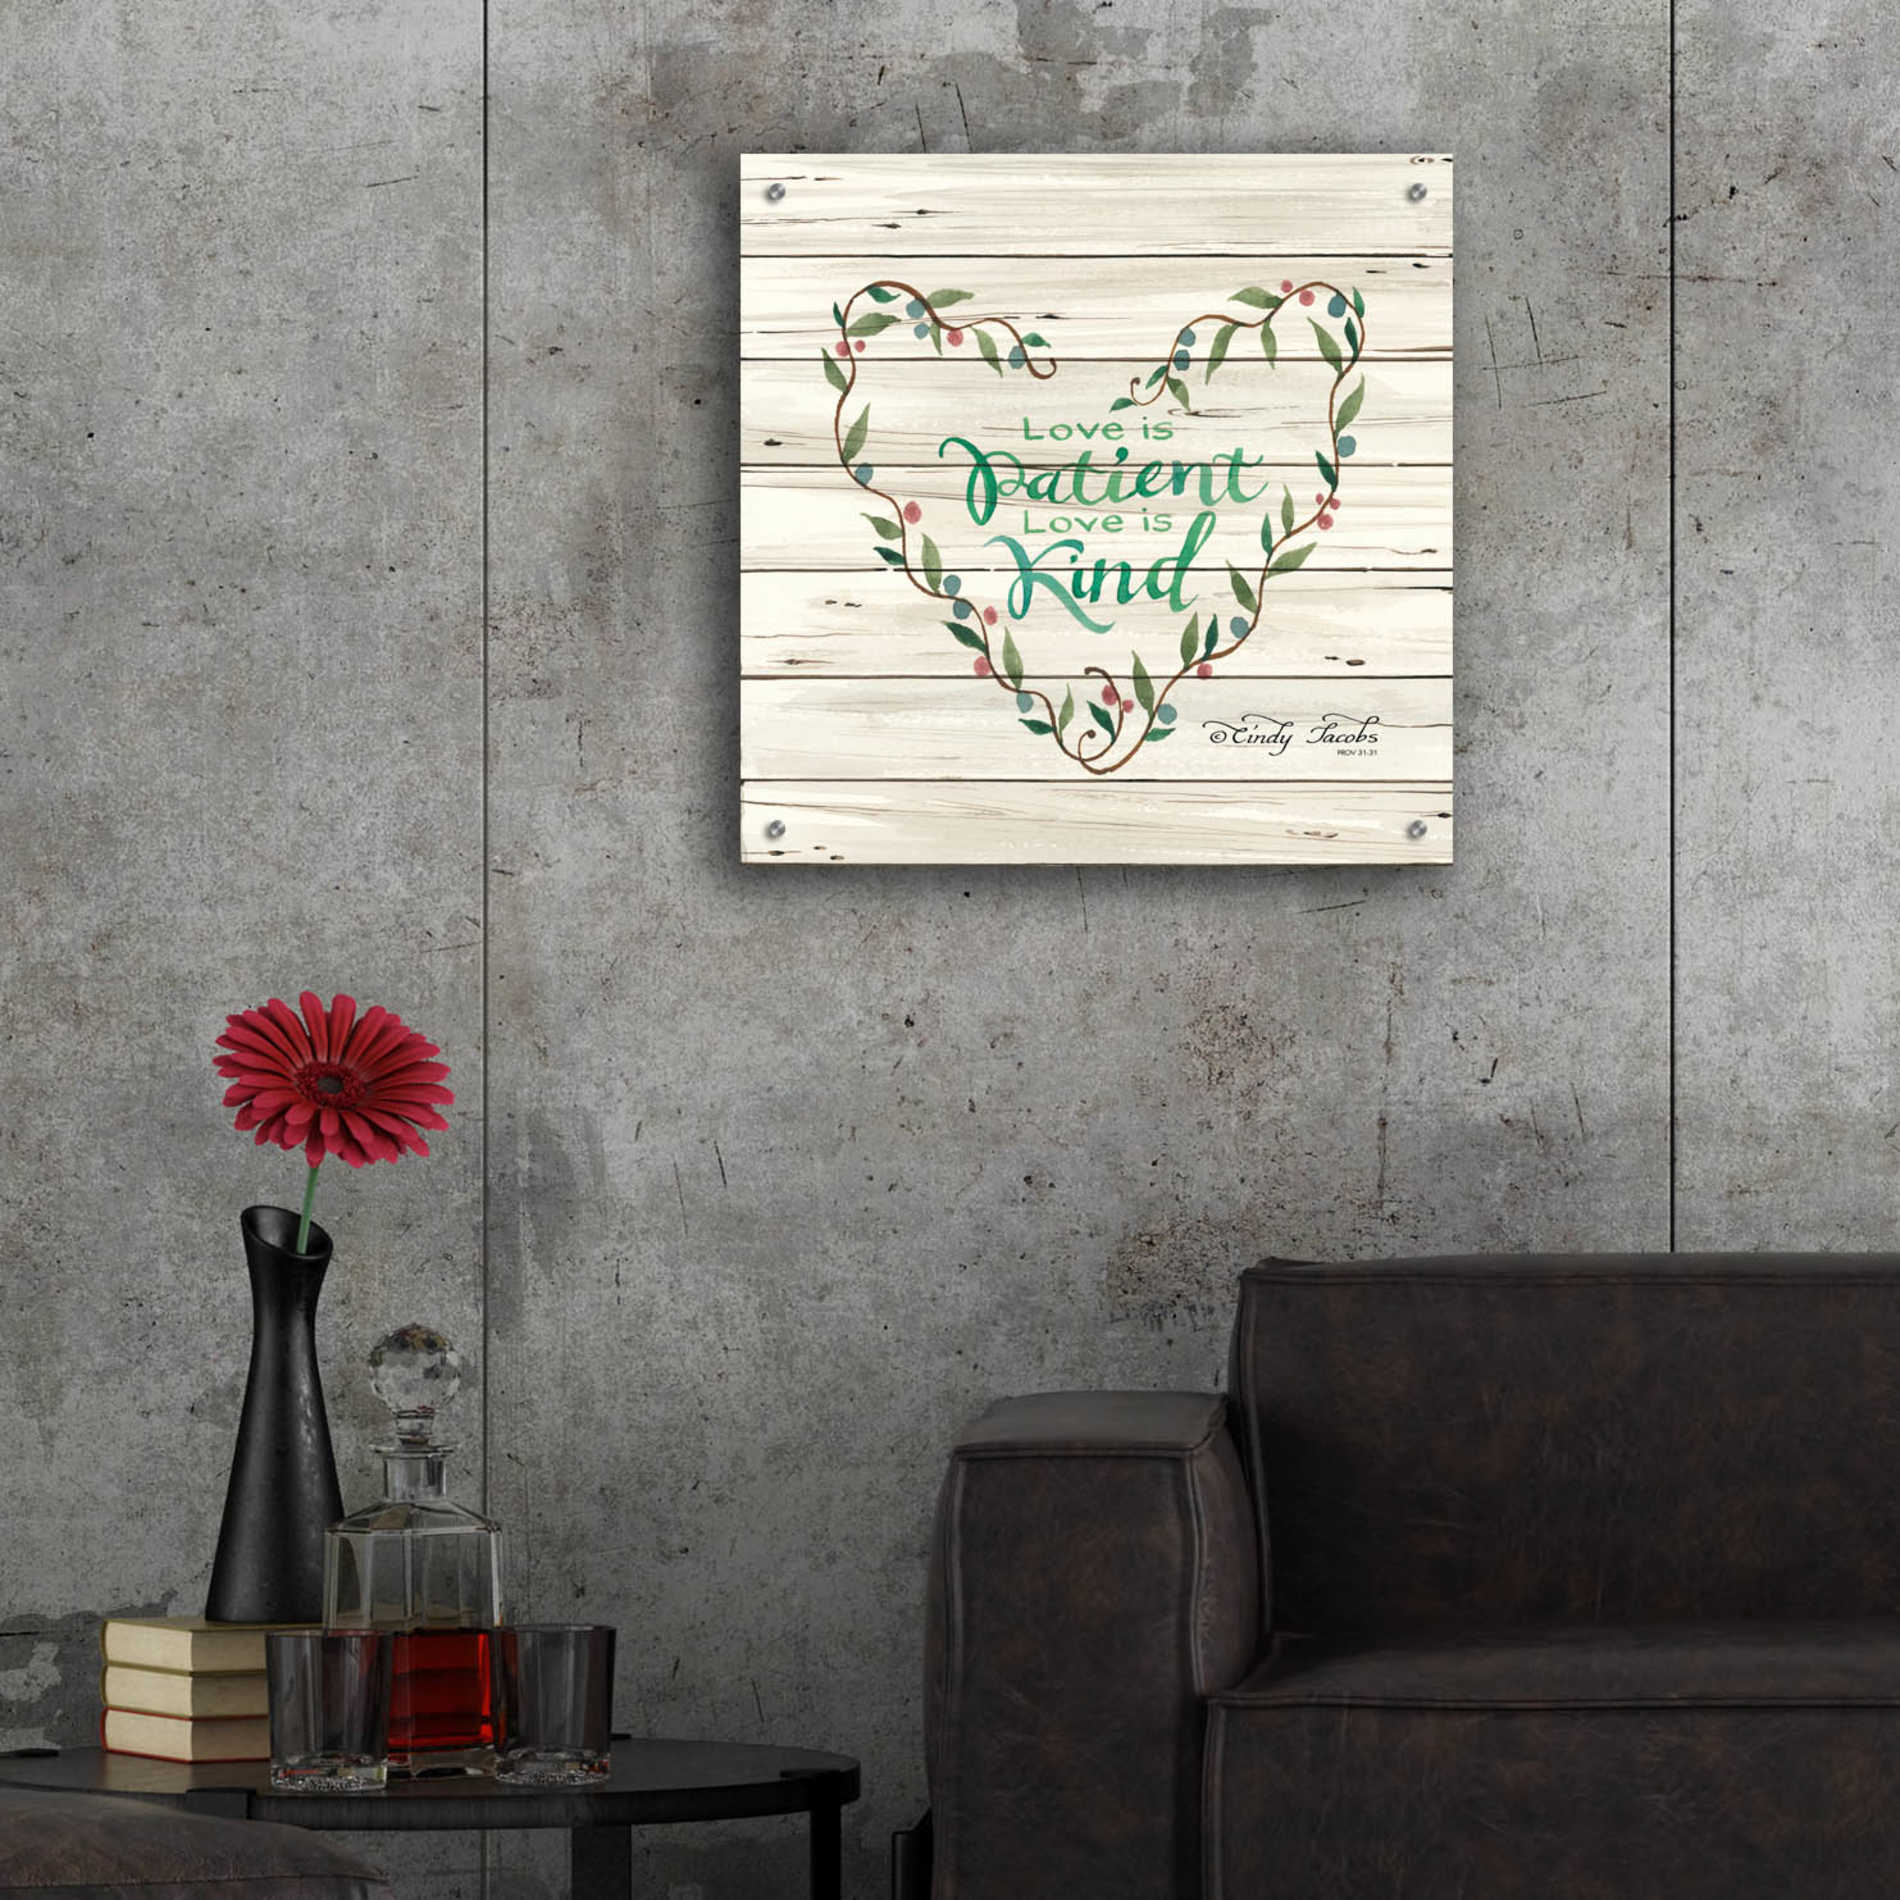 Epic Art 'Love is Patient Heart Wreath' by Cindy Jacobs, Acrylic Glass Wall Art,24x24